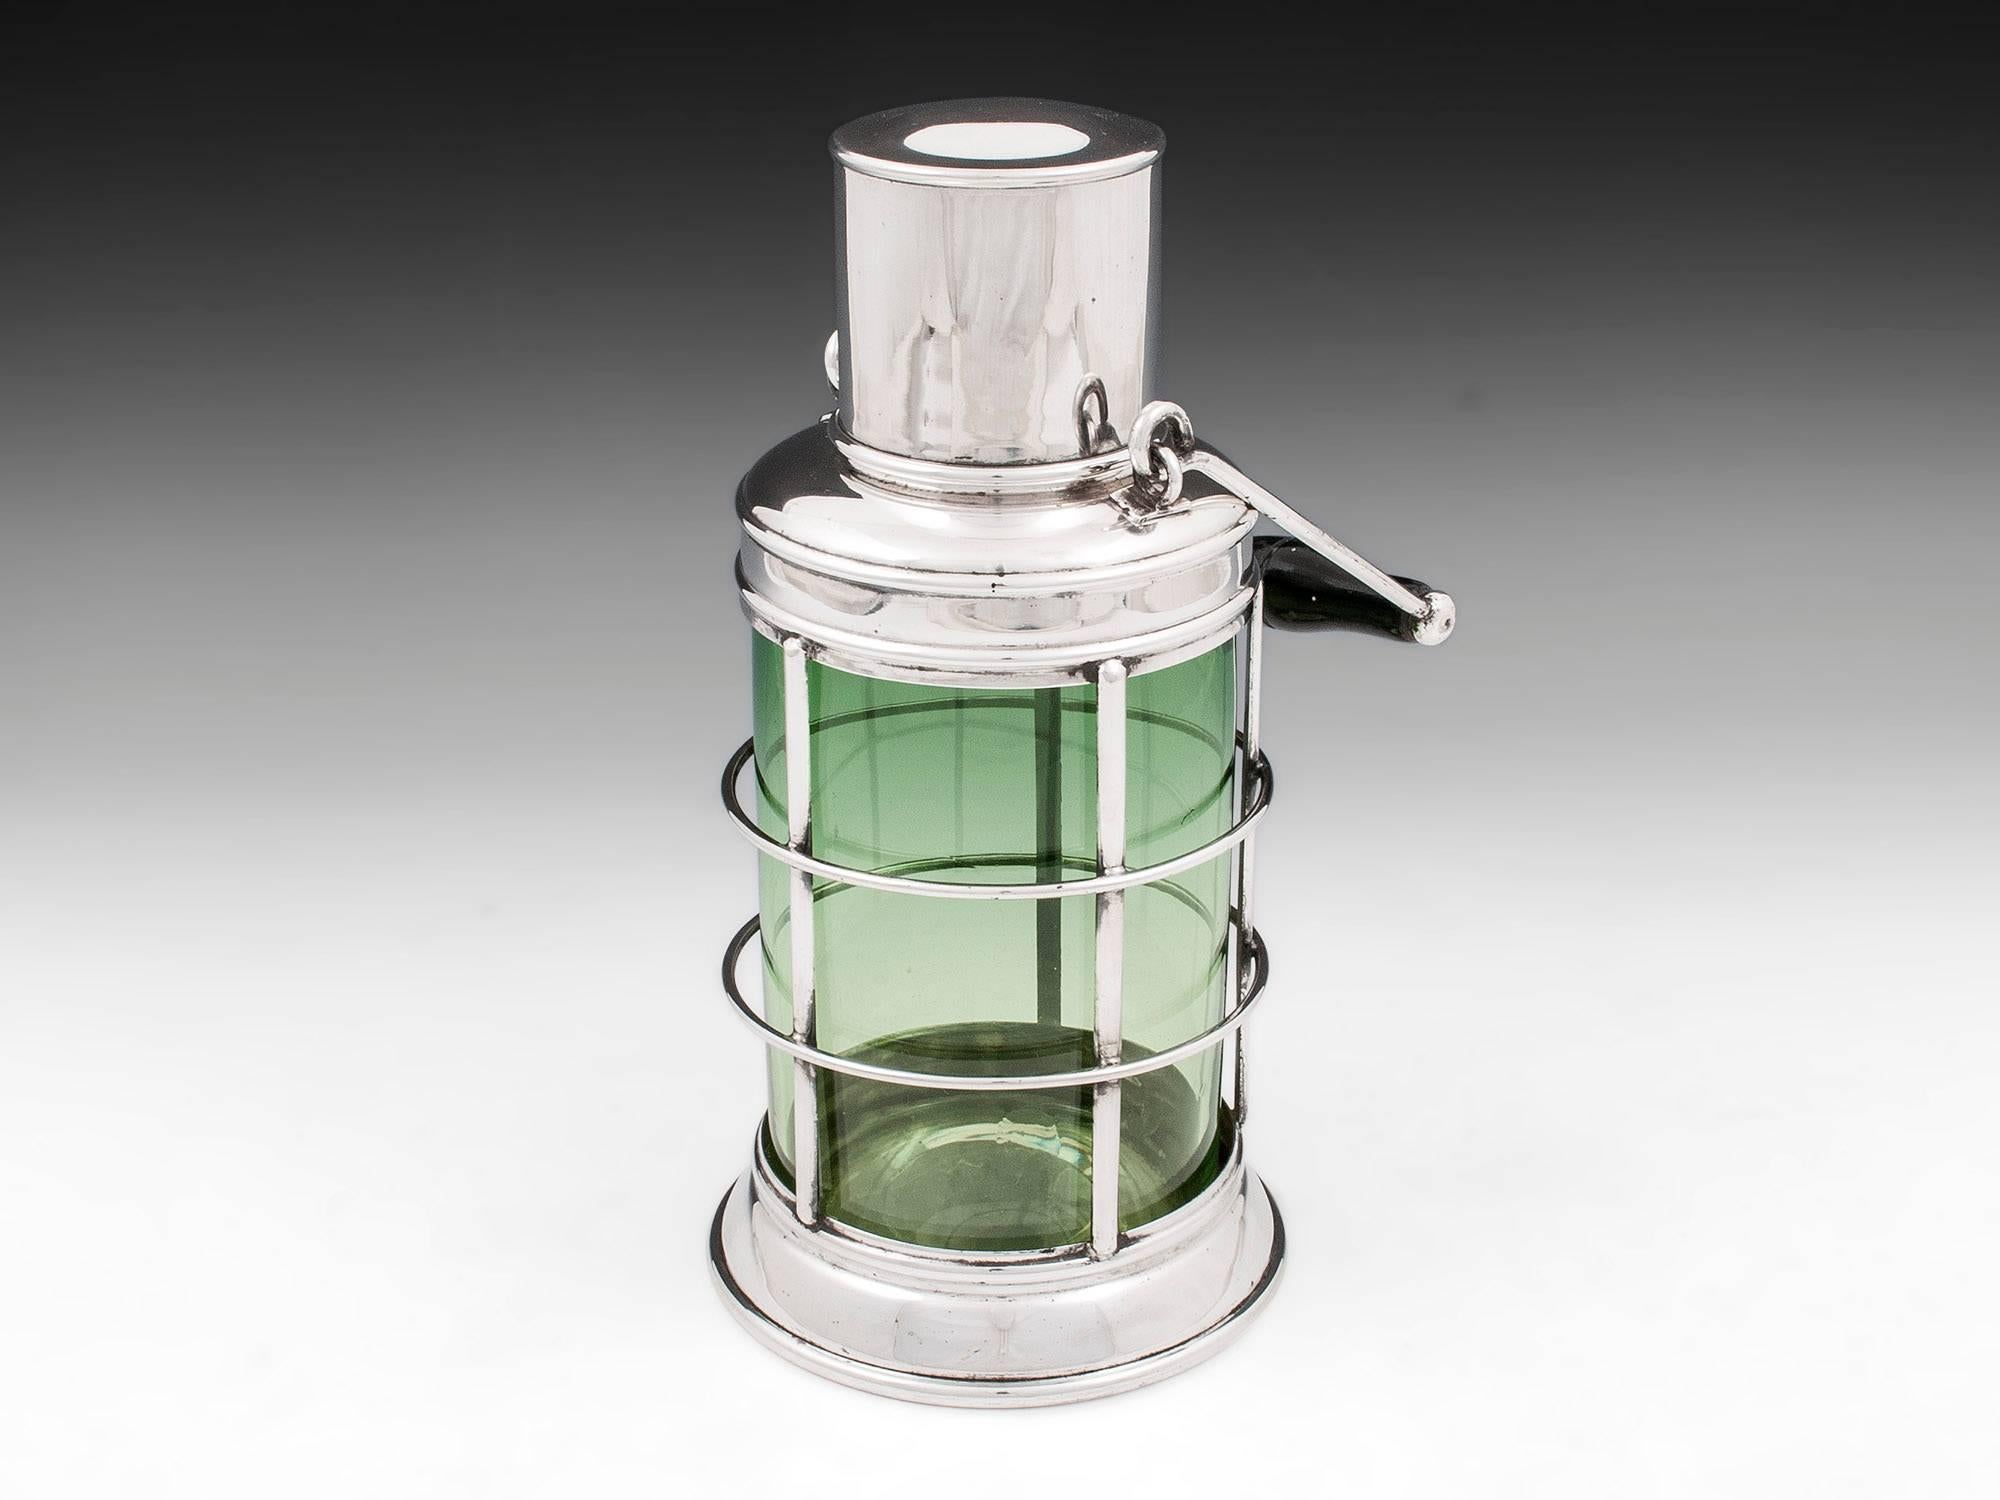 Novelty silver plated cocktail Shaker in the form of a lantern with cylindrical green glass body. Complete with wooden turned ebonized carry handle. 

The top of the lantern cocktail Shaker has cork stopper, strainer and silver plate lid.